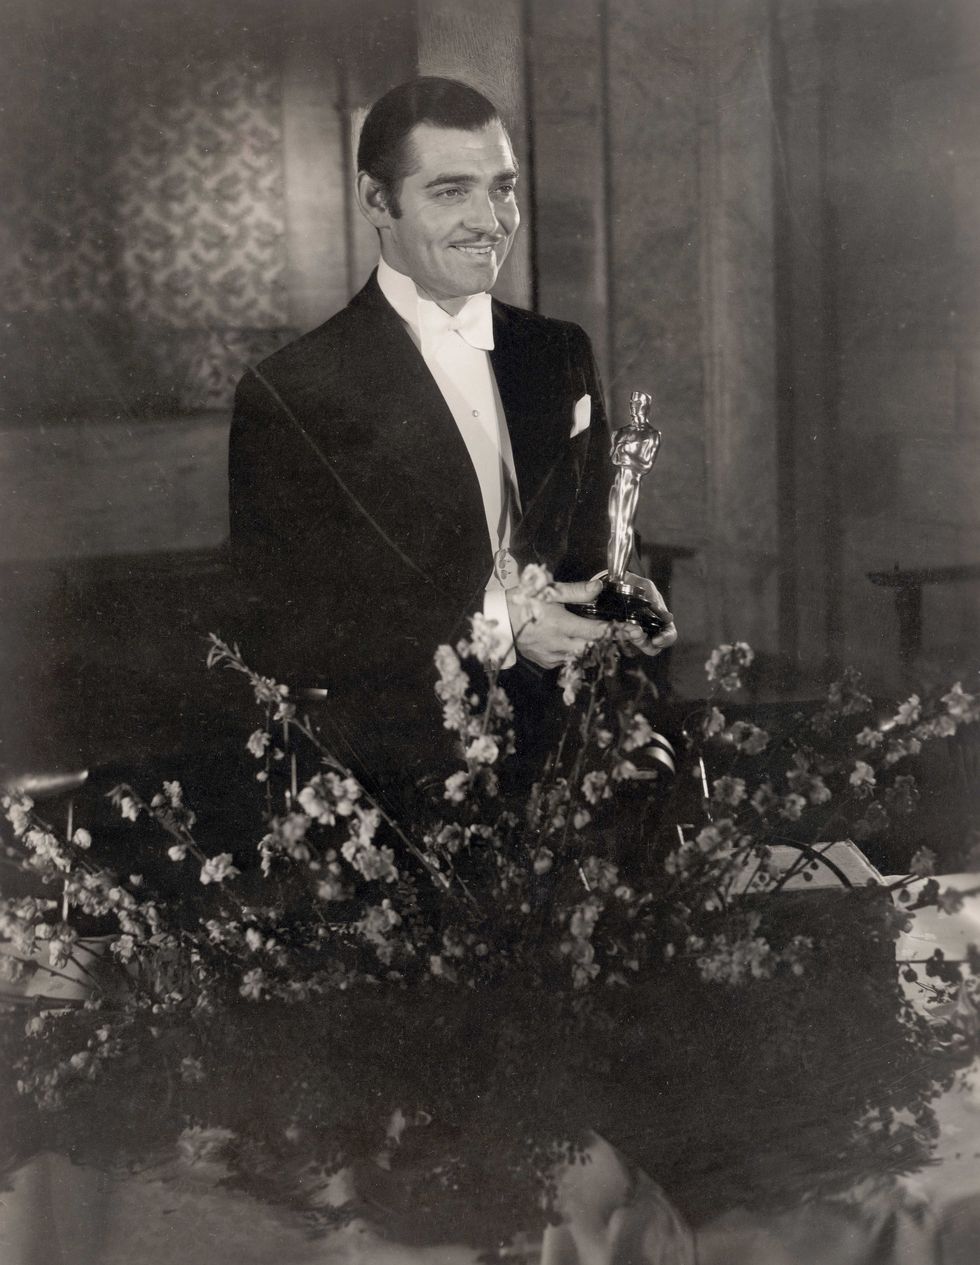 <p>Clark Gable, dapper in white tie and tails, picks up the Best Actor award for <i data-redactor-tag="i">It Happened One Night</i>. The film also won Best Actress for Claudette Colbert, Best Director for <a href="http://www.townandcountrymag.com/leisure/arts-and-culture/news/a8963/its-a-wonderful-life-christmas/" target="_blank" data-tracking-id="recirc-text-link">Frank Capra</a>, and Outstanding Production.<span class="redactor-invisible-space" data-verified="redactor" data-redactor-tag="span" data-redactor-class="redactor-invisible-space"></span></p>